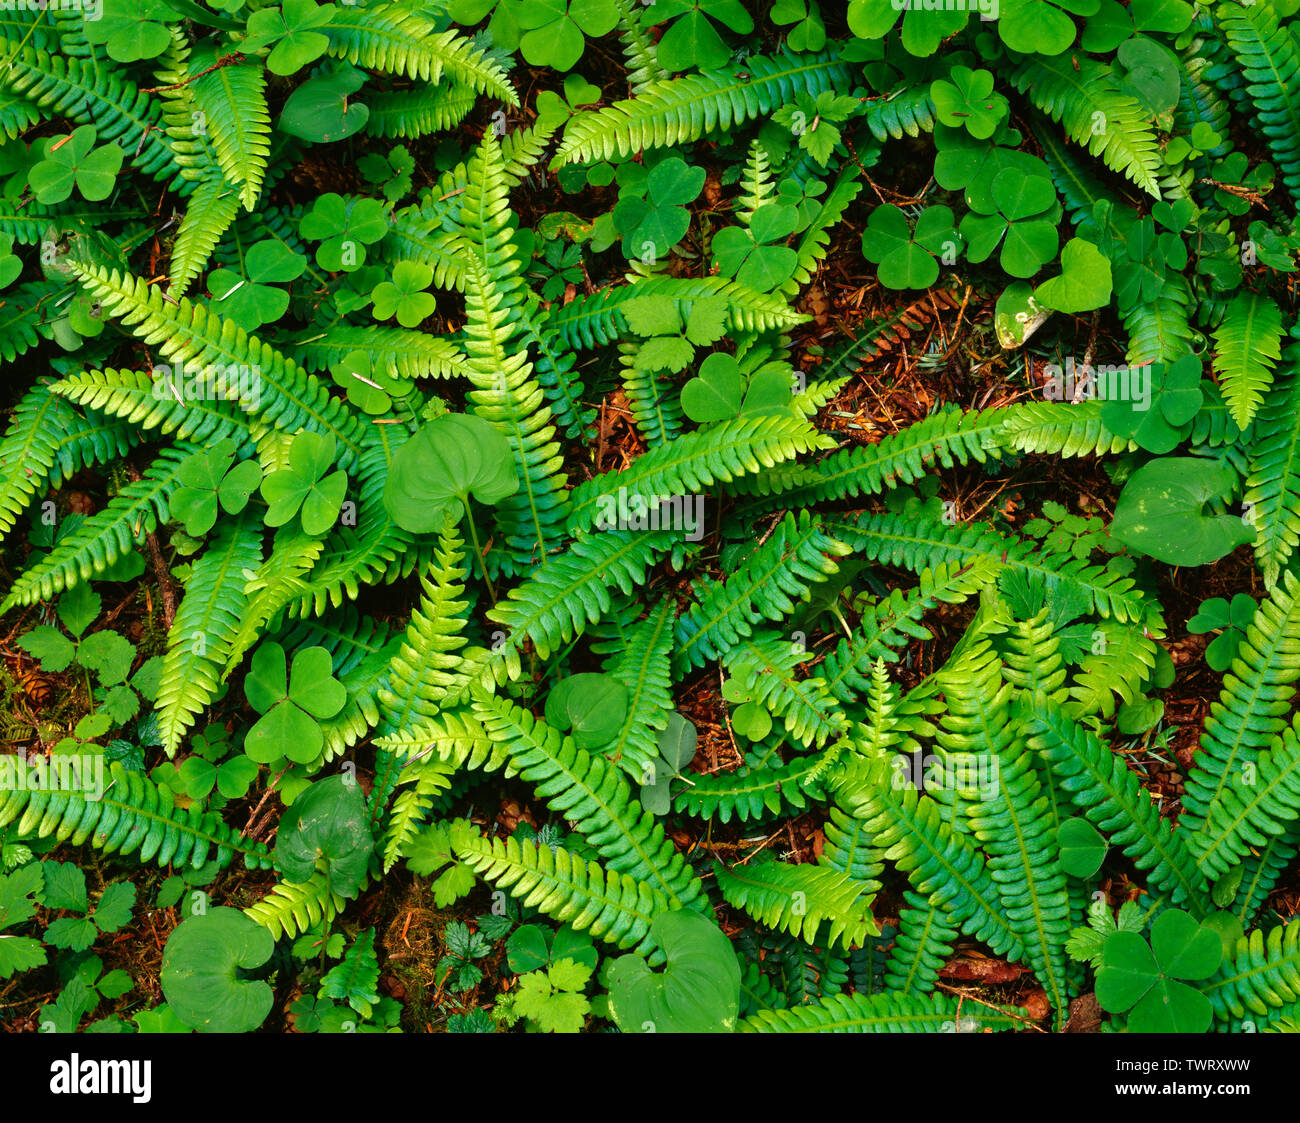 USA, Washington, Olympic National Park, Deer fern, wood sorrel and wild ginger crowd the forest floor; Hoh Rain Forest. Stock Photo